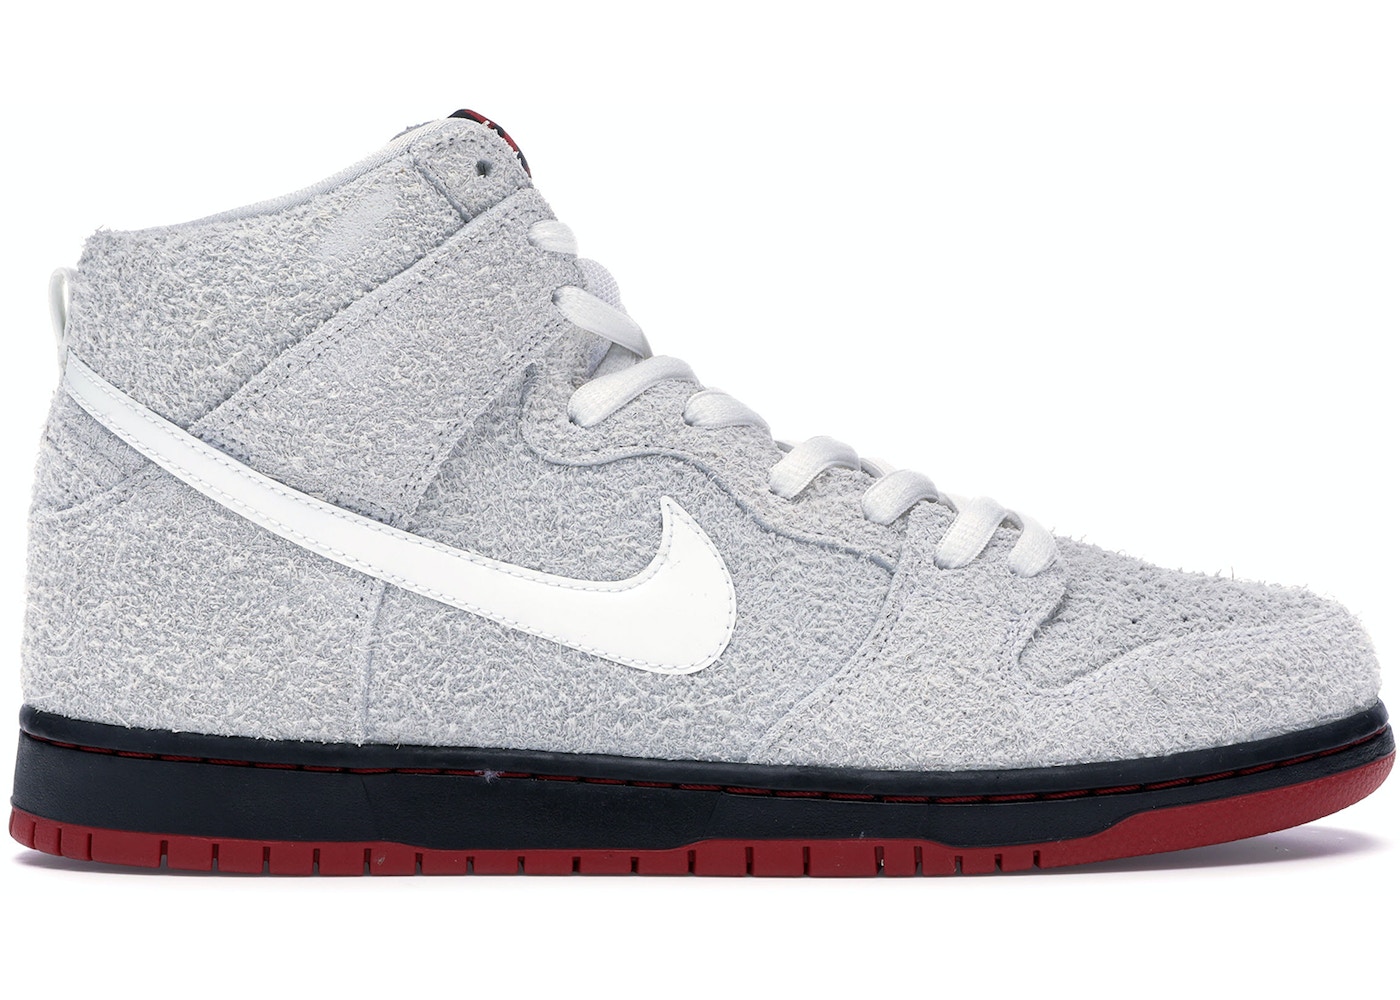 Nike Dunk SB High Wolf In Sheep's Clothing - 881758-110